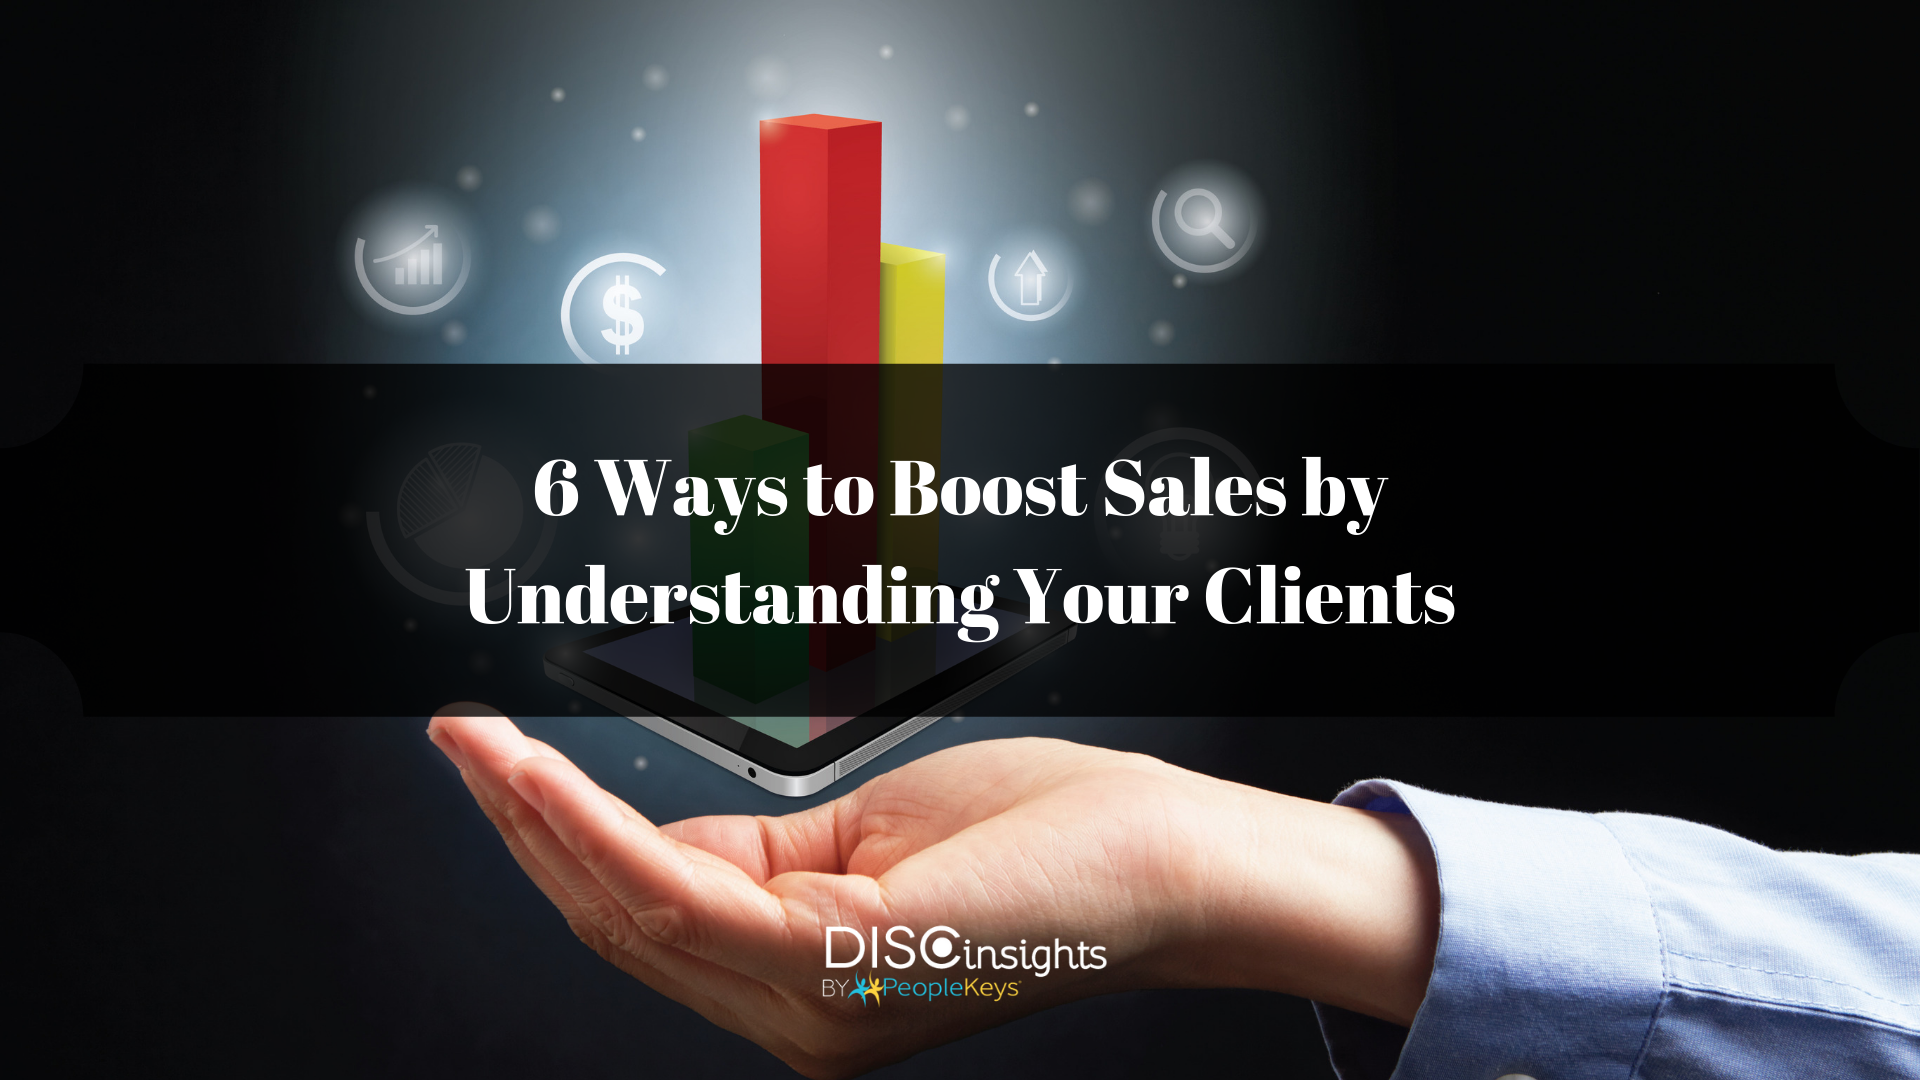 6 Ways to Boost Sales by Understanding Your Clients